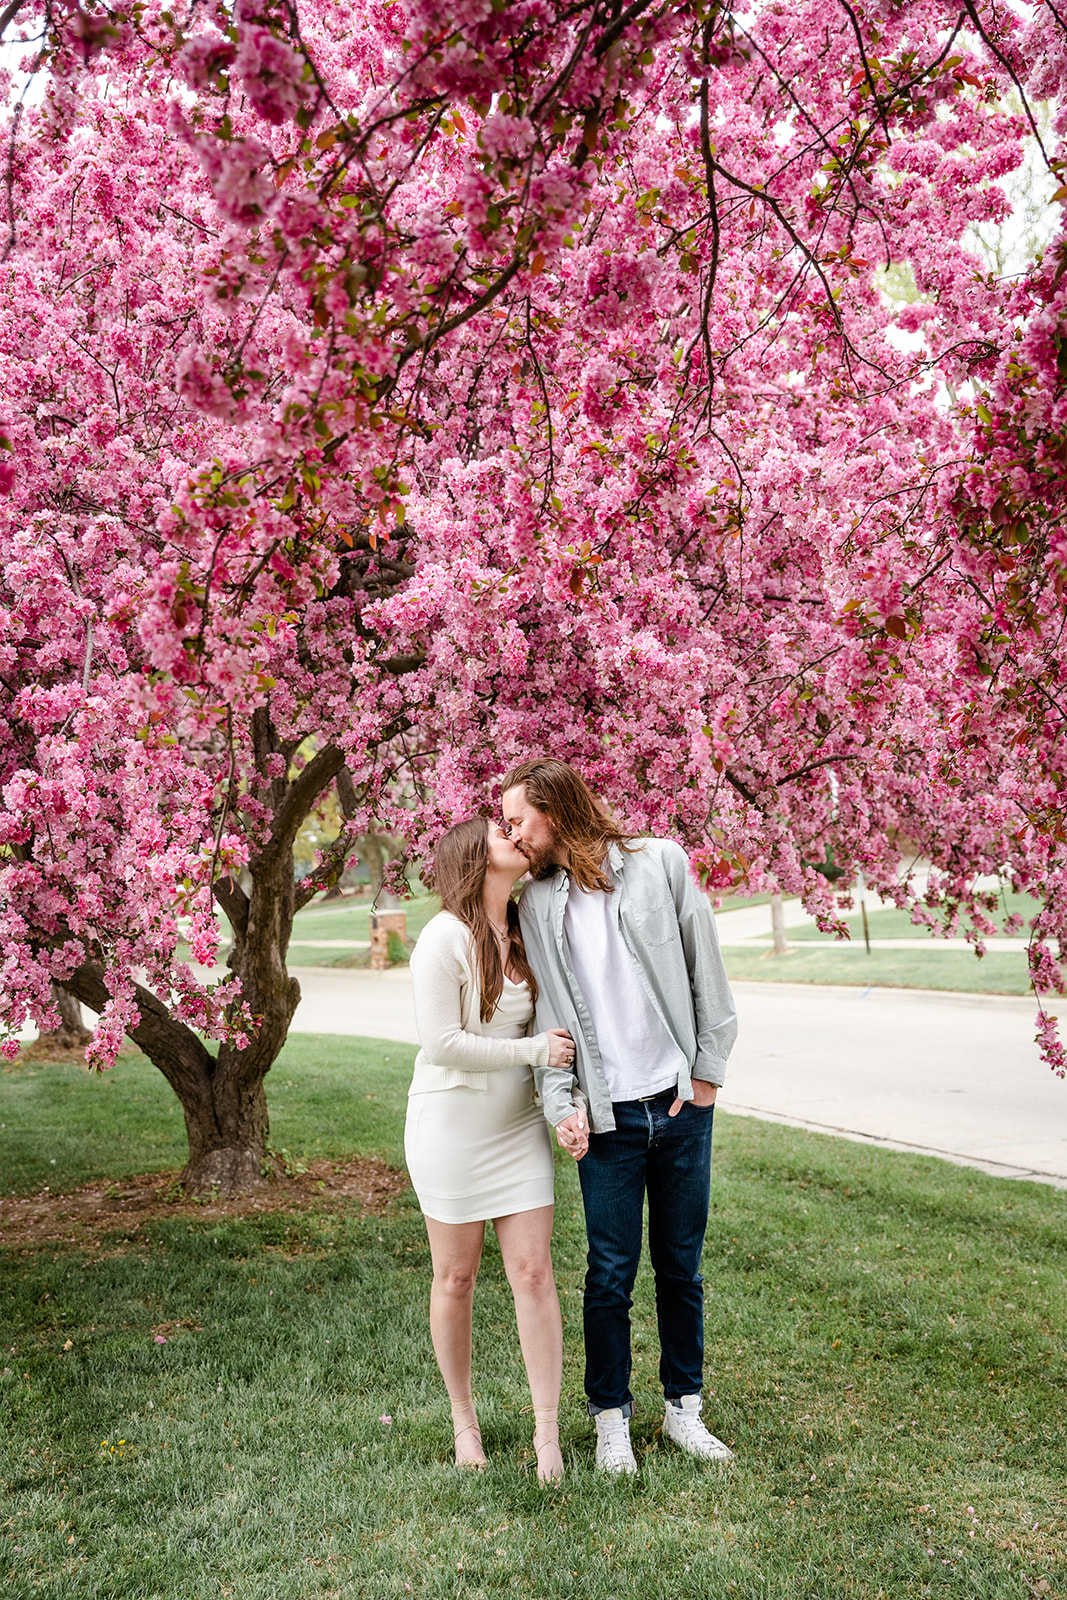 Full body crop of couple by blooming tree